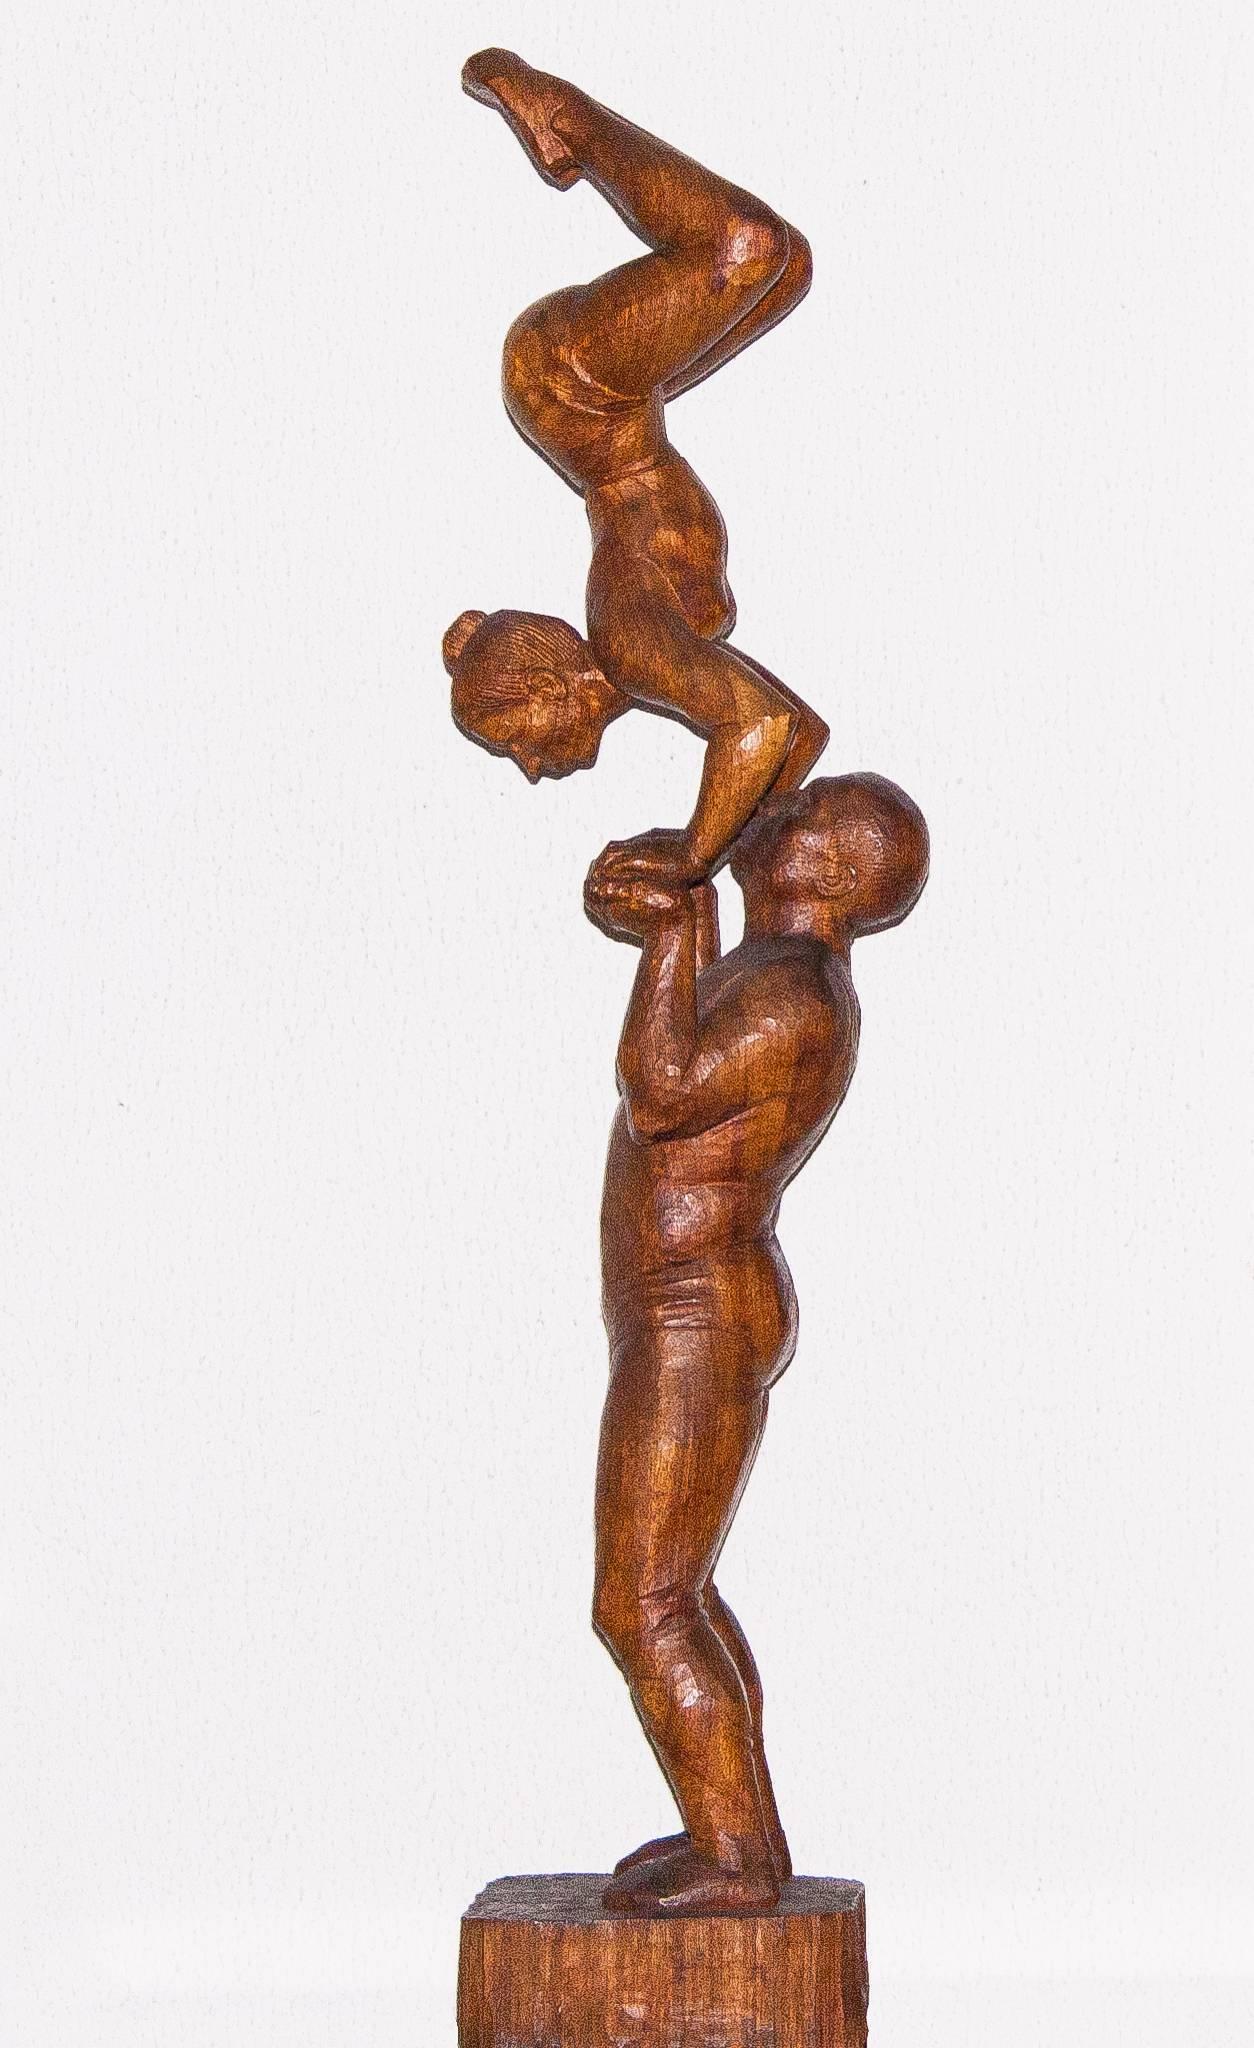 Beautiful wooden sculpture of Cornelis Jan (Cor) van Kralingen (1908-1977).
The title of this sculpture is 'the acrobats.'
Other famous sculptures by his hand are: ‘the falling man,' ‘Kneeling woman with Pigeon,' 'The Twentse ros,' 'aquatic